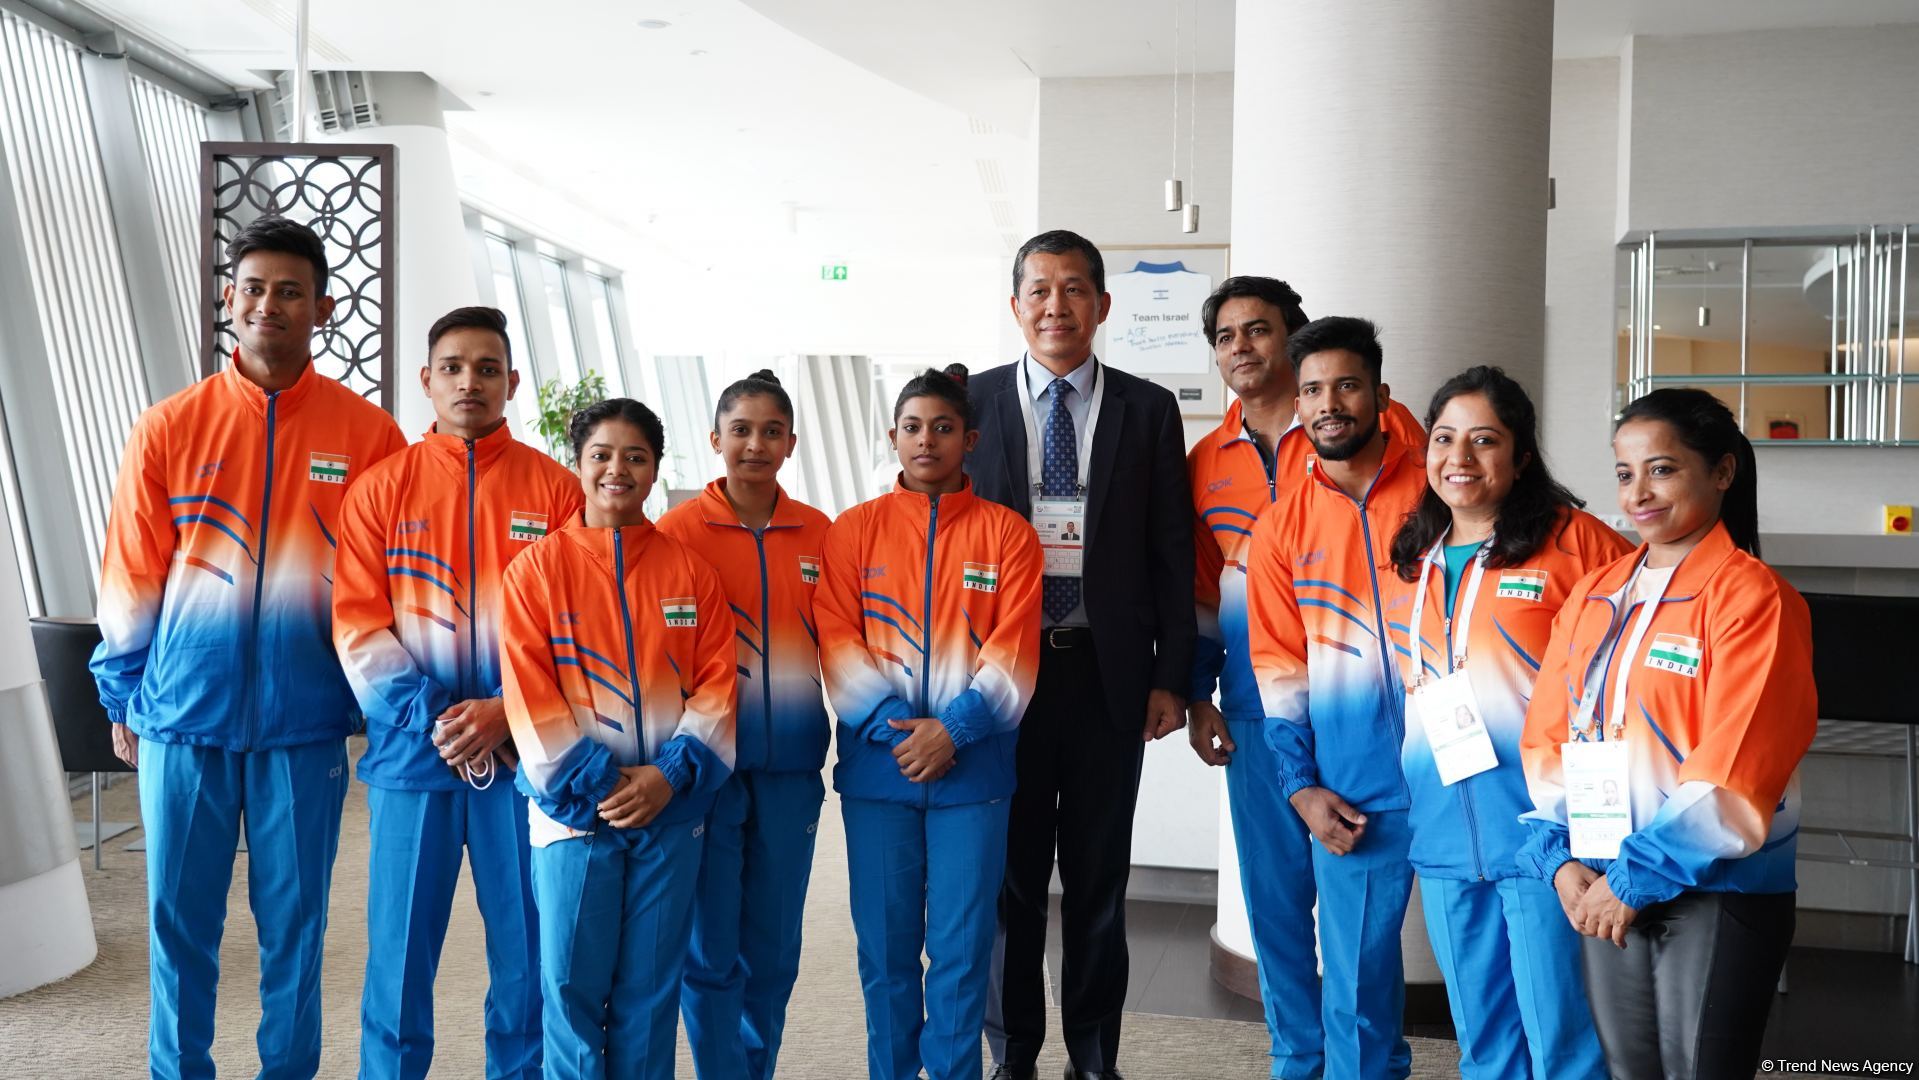 India's ambassador meets with athletes of his country within FIG Artistic Gymnastics Apparatus World Cup in Baku (PHOTO)